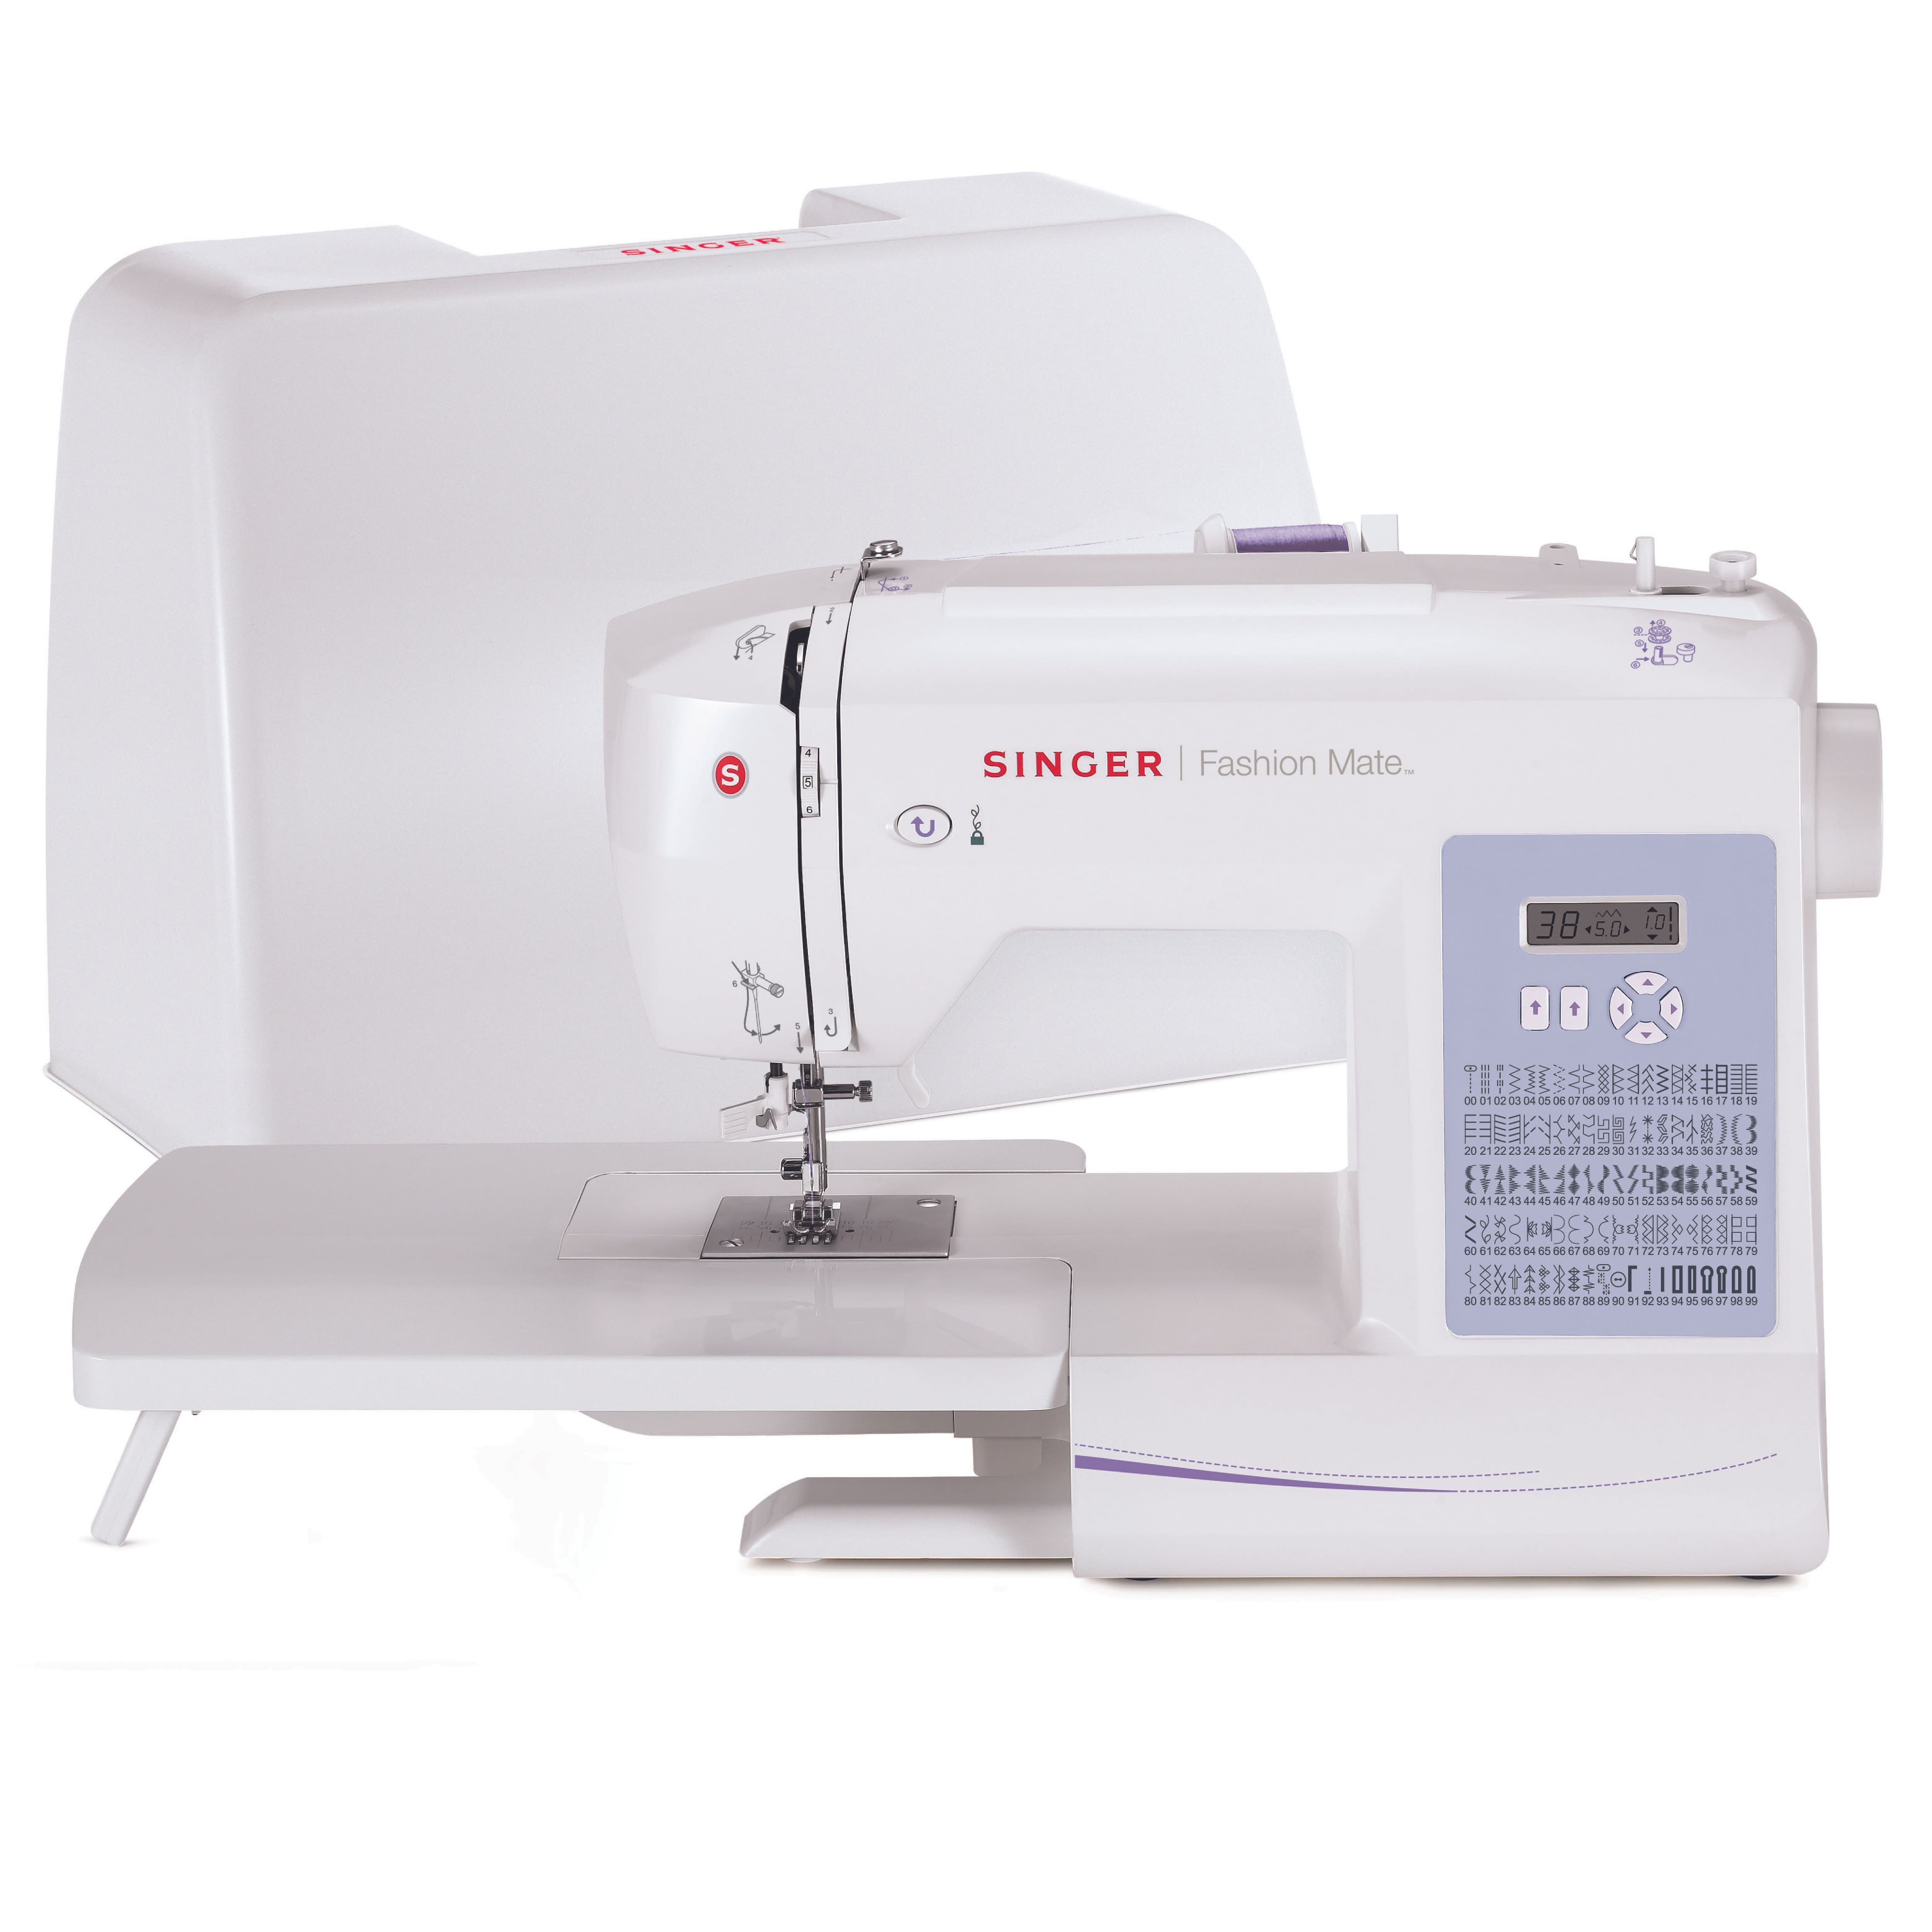 Brother LB5000 Sewing and Embroidery Machine 4x4 With $199 Bonus Bundle